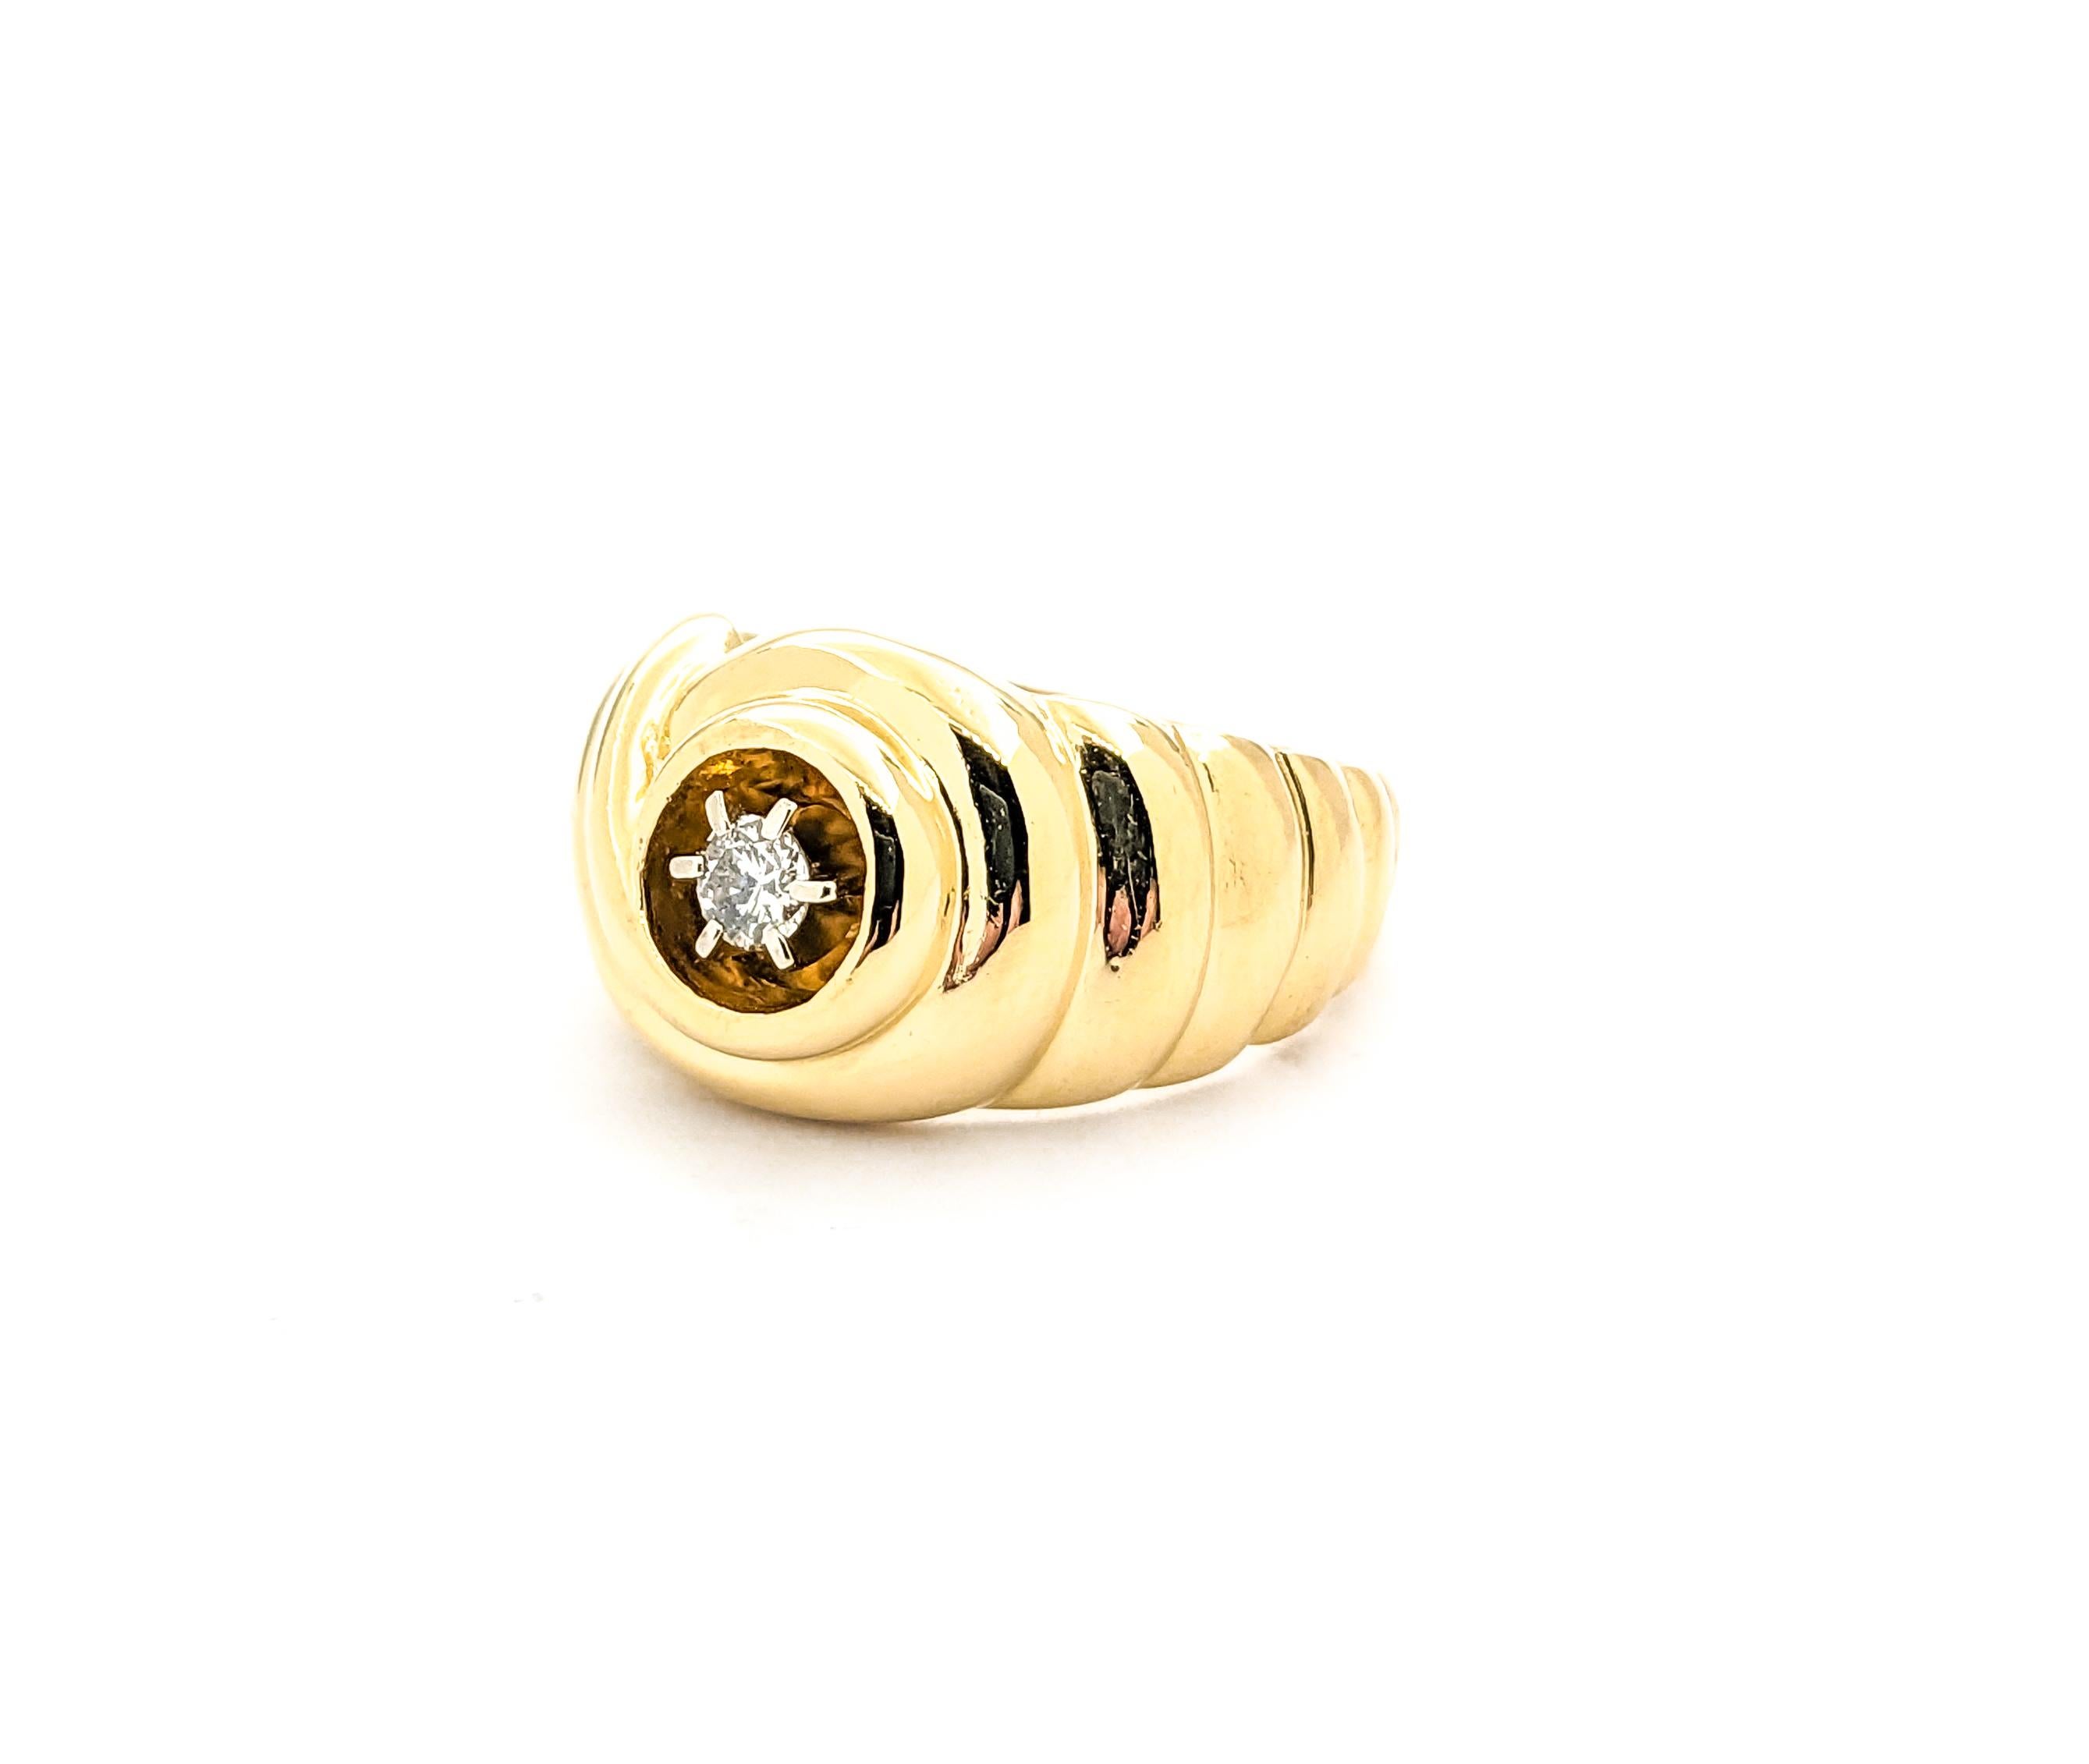 5ct Diamond Swirl Design Ring In Yellow Gold For Sale 7